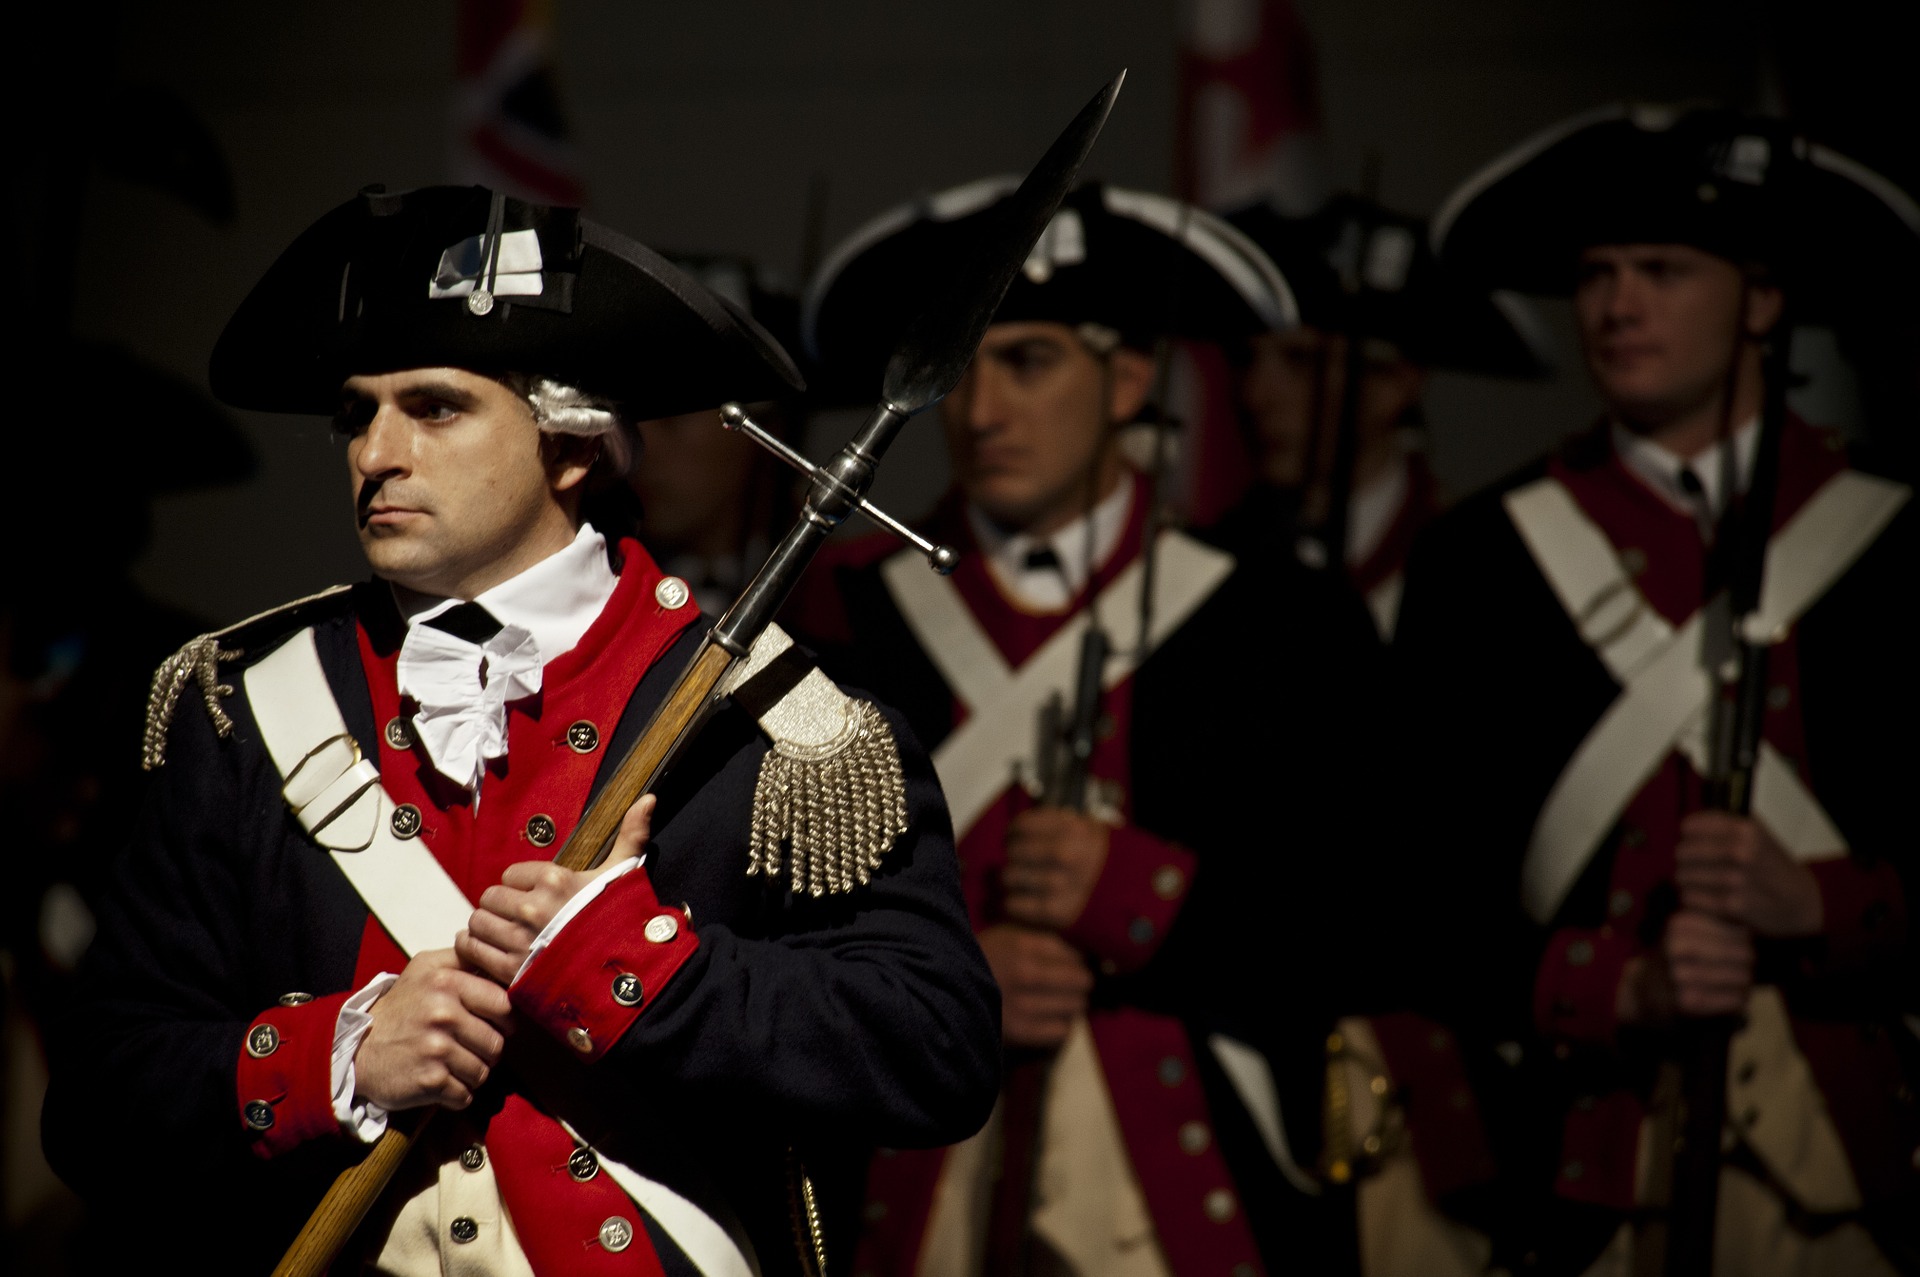 Revolutionary war monuments and reenactments, soldiers holding weapons